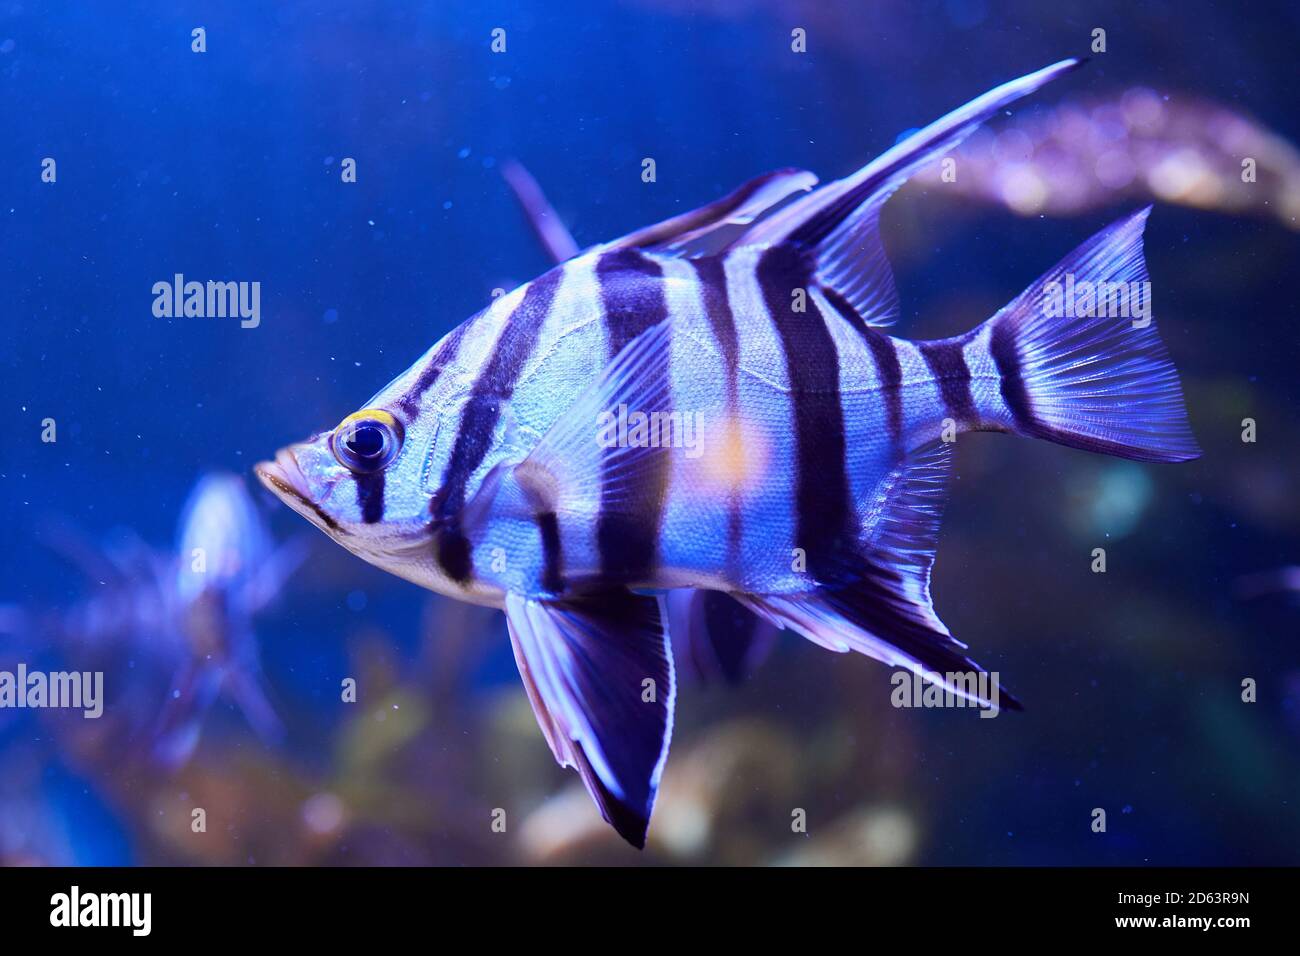 Old Wife (Enoplosus armatus) A black and white striped fish with a small head and long fins on top swimming in aquarium Stock Photo